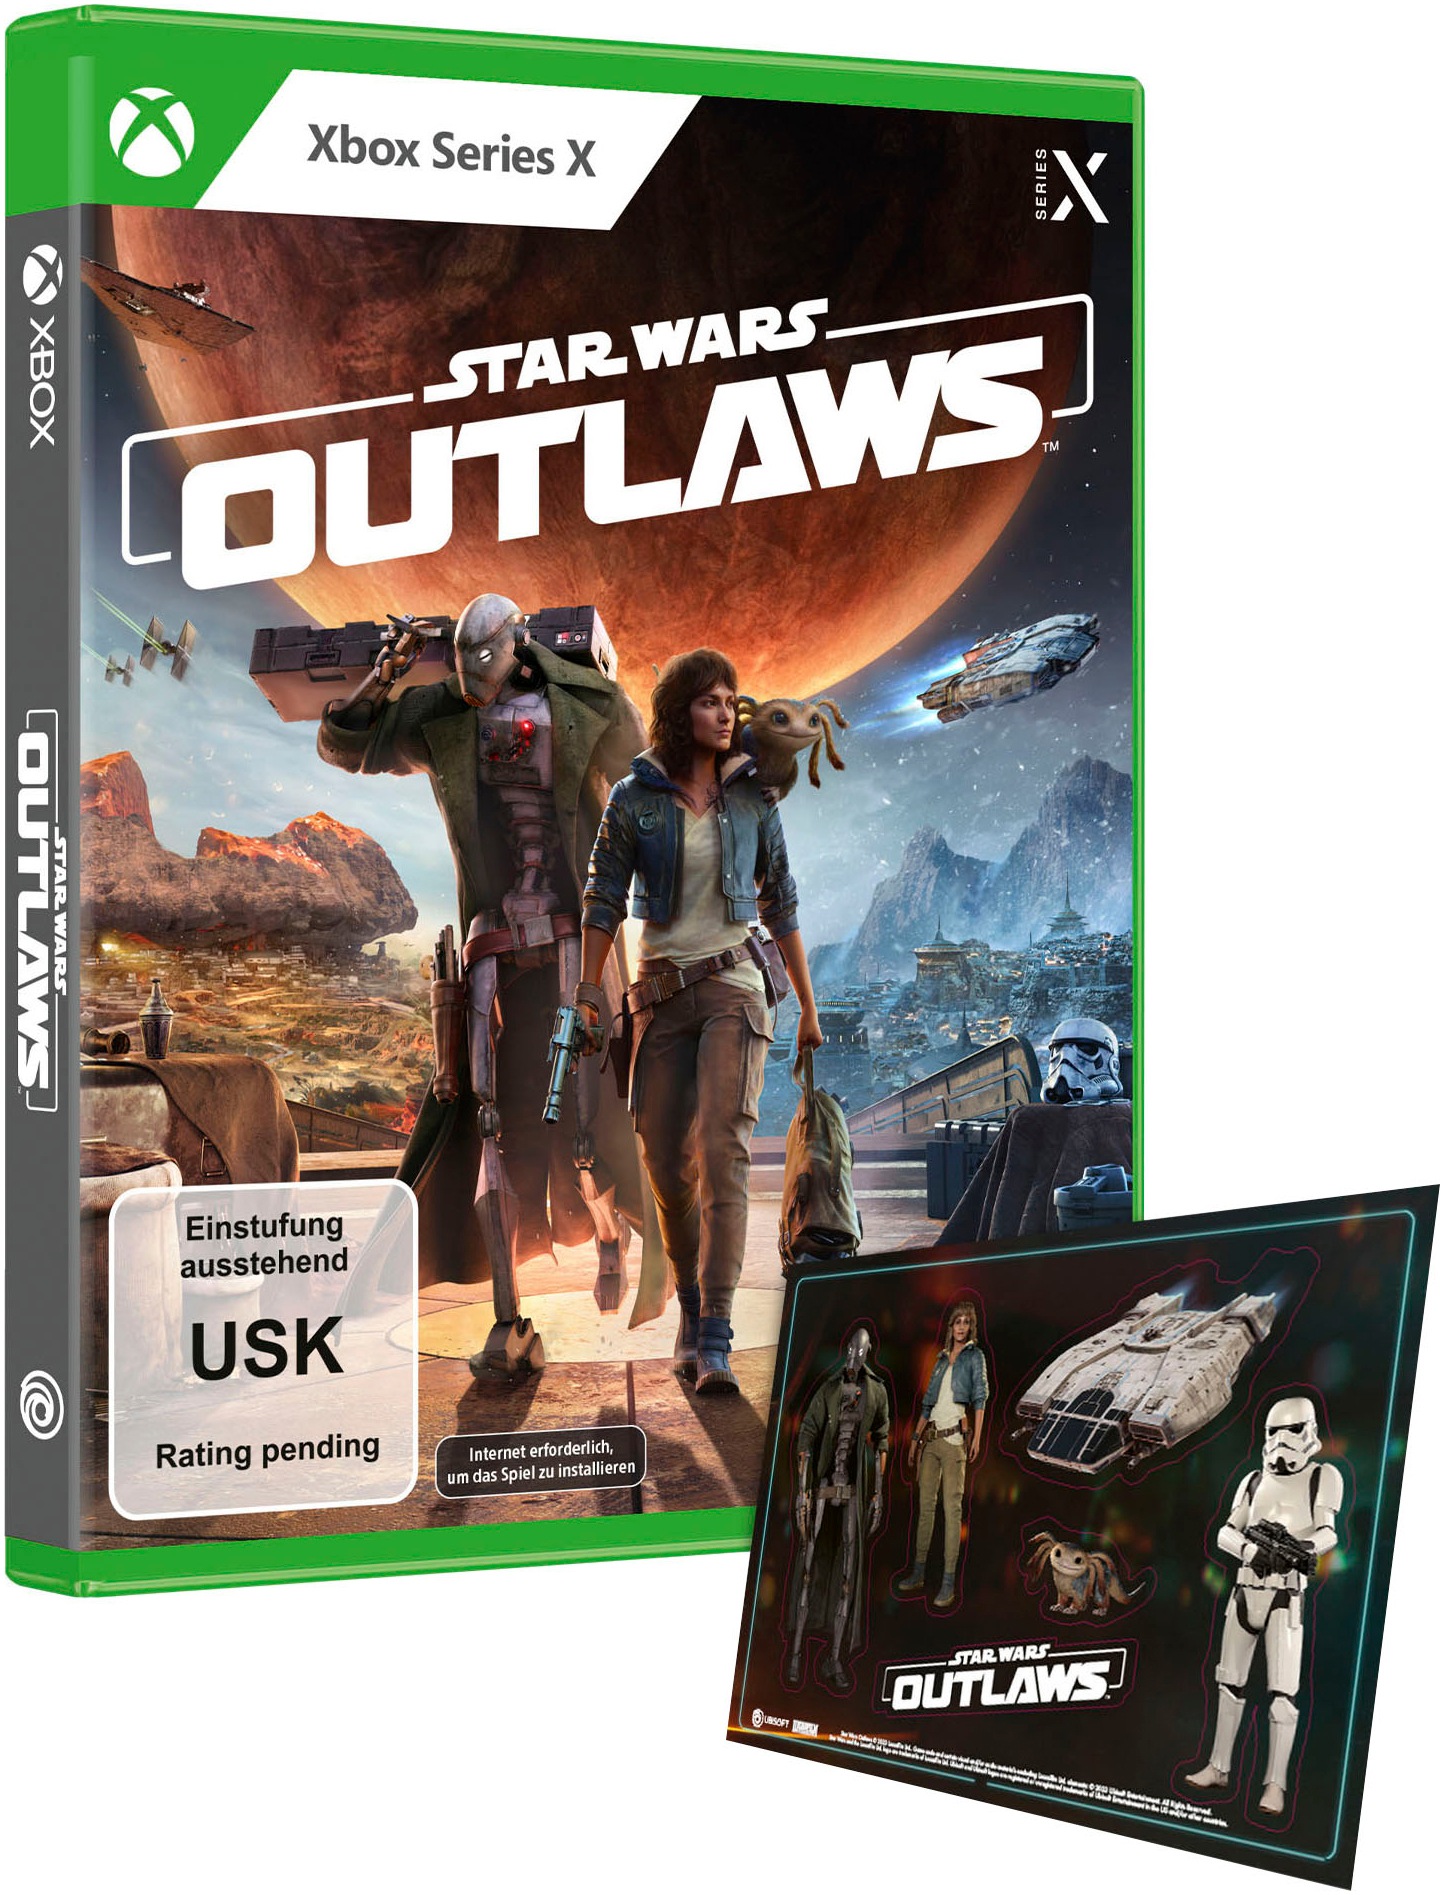 Spielesoftware »Star Wars Outlaws«, Xbox Series X